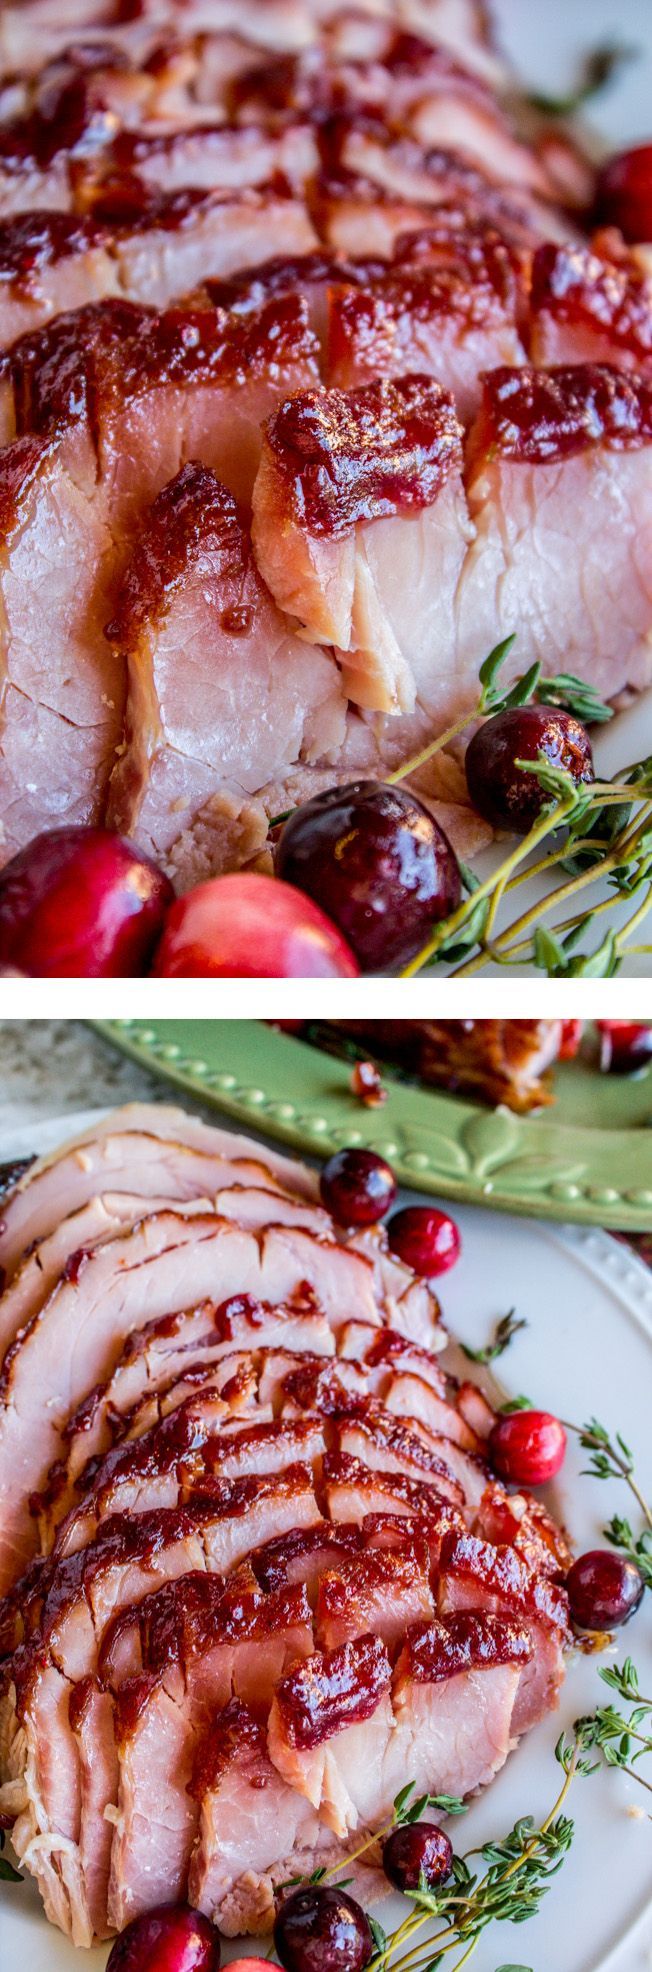 Oven roasted Cranberry Dijon Glazed Ham from The Food Charlatan. Aint nothin better than an oven-roasted glazed ham I say! This